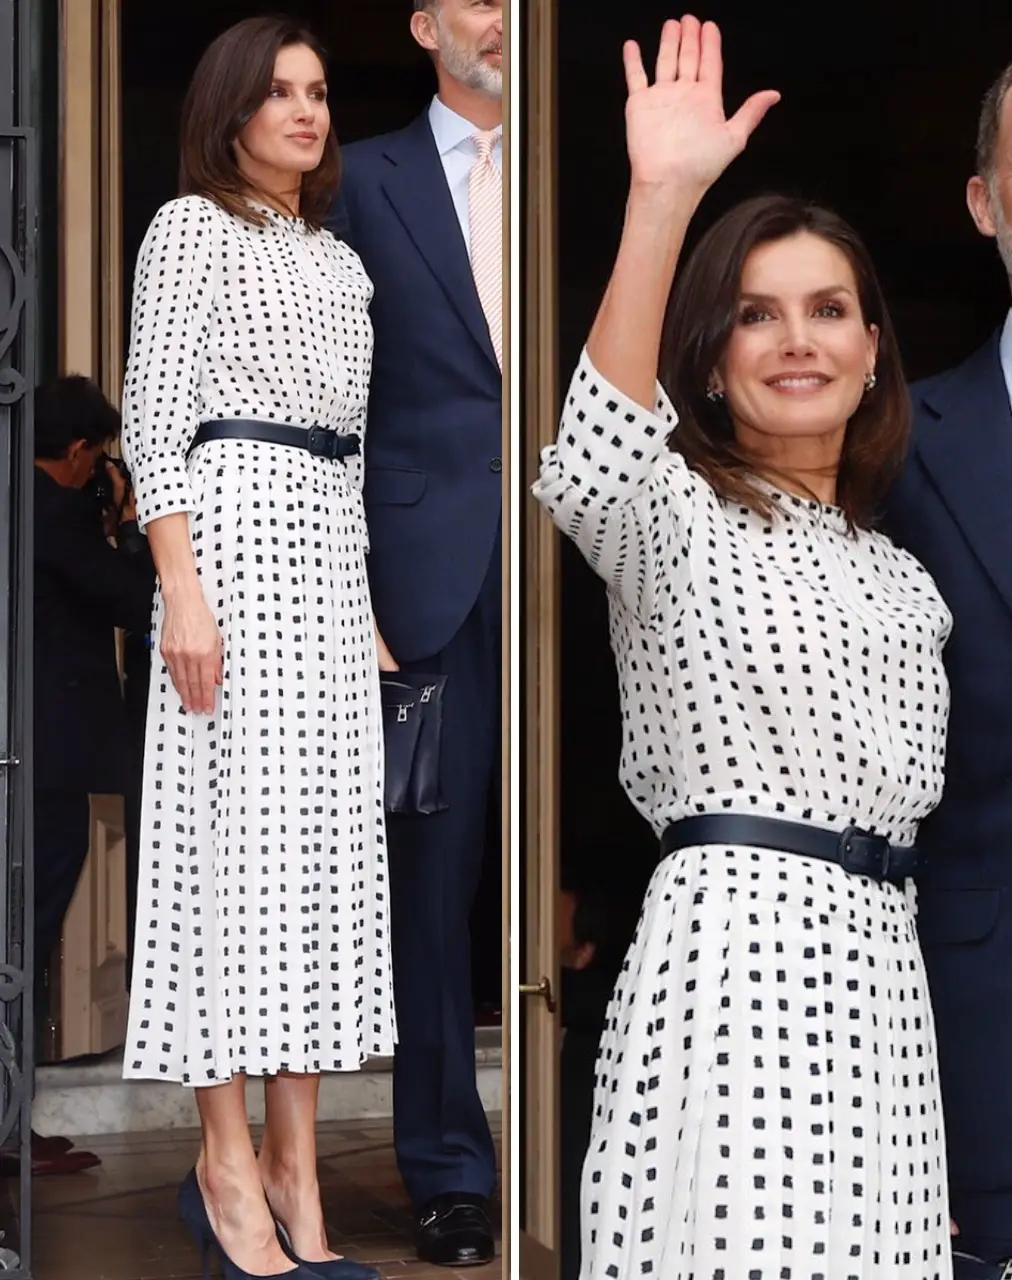 Queen Letizia of Spain was wearing a pleated dress with a two-tone print from Spanish label Massimo Dutti